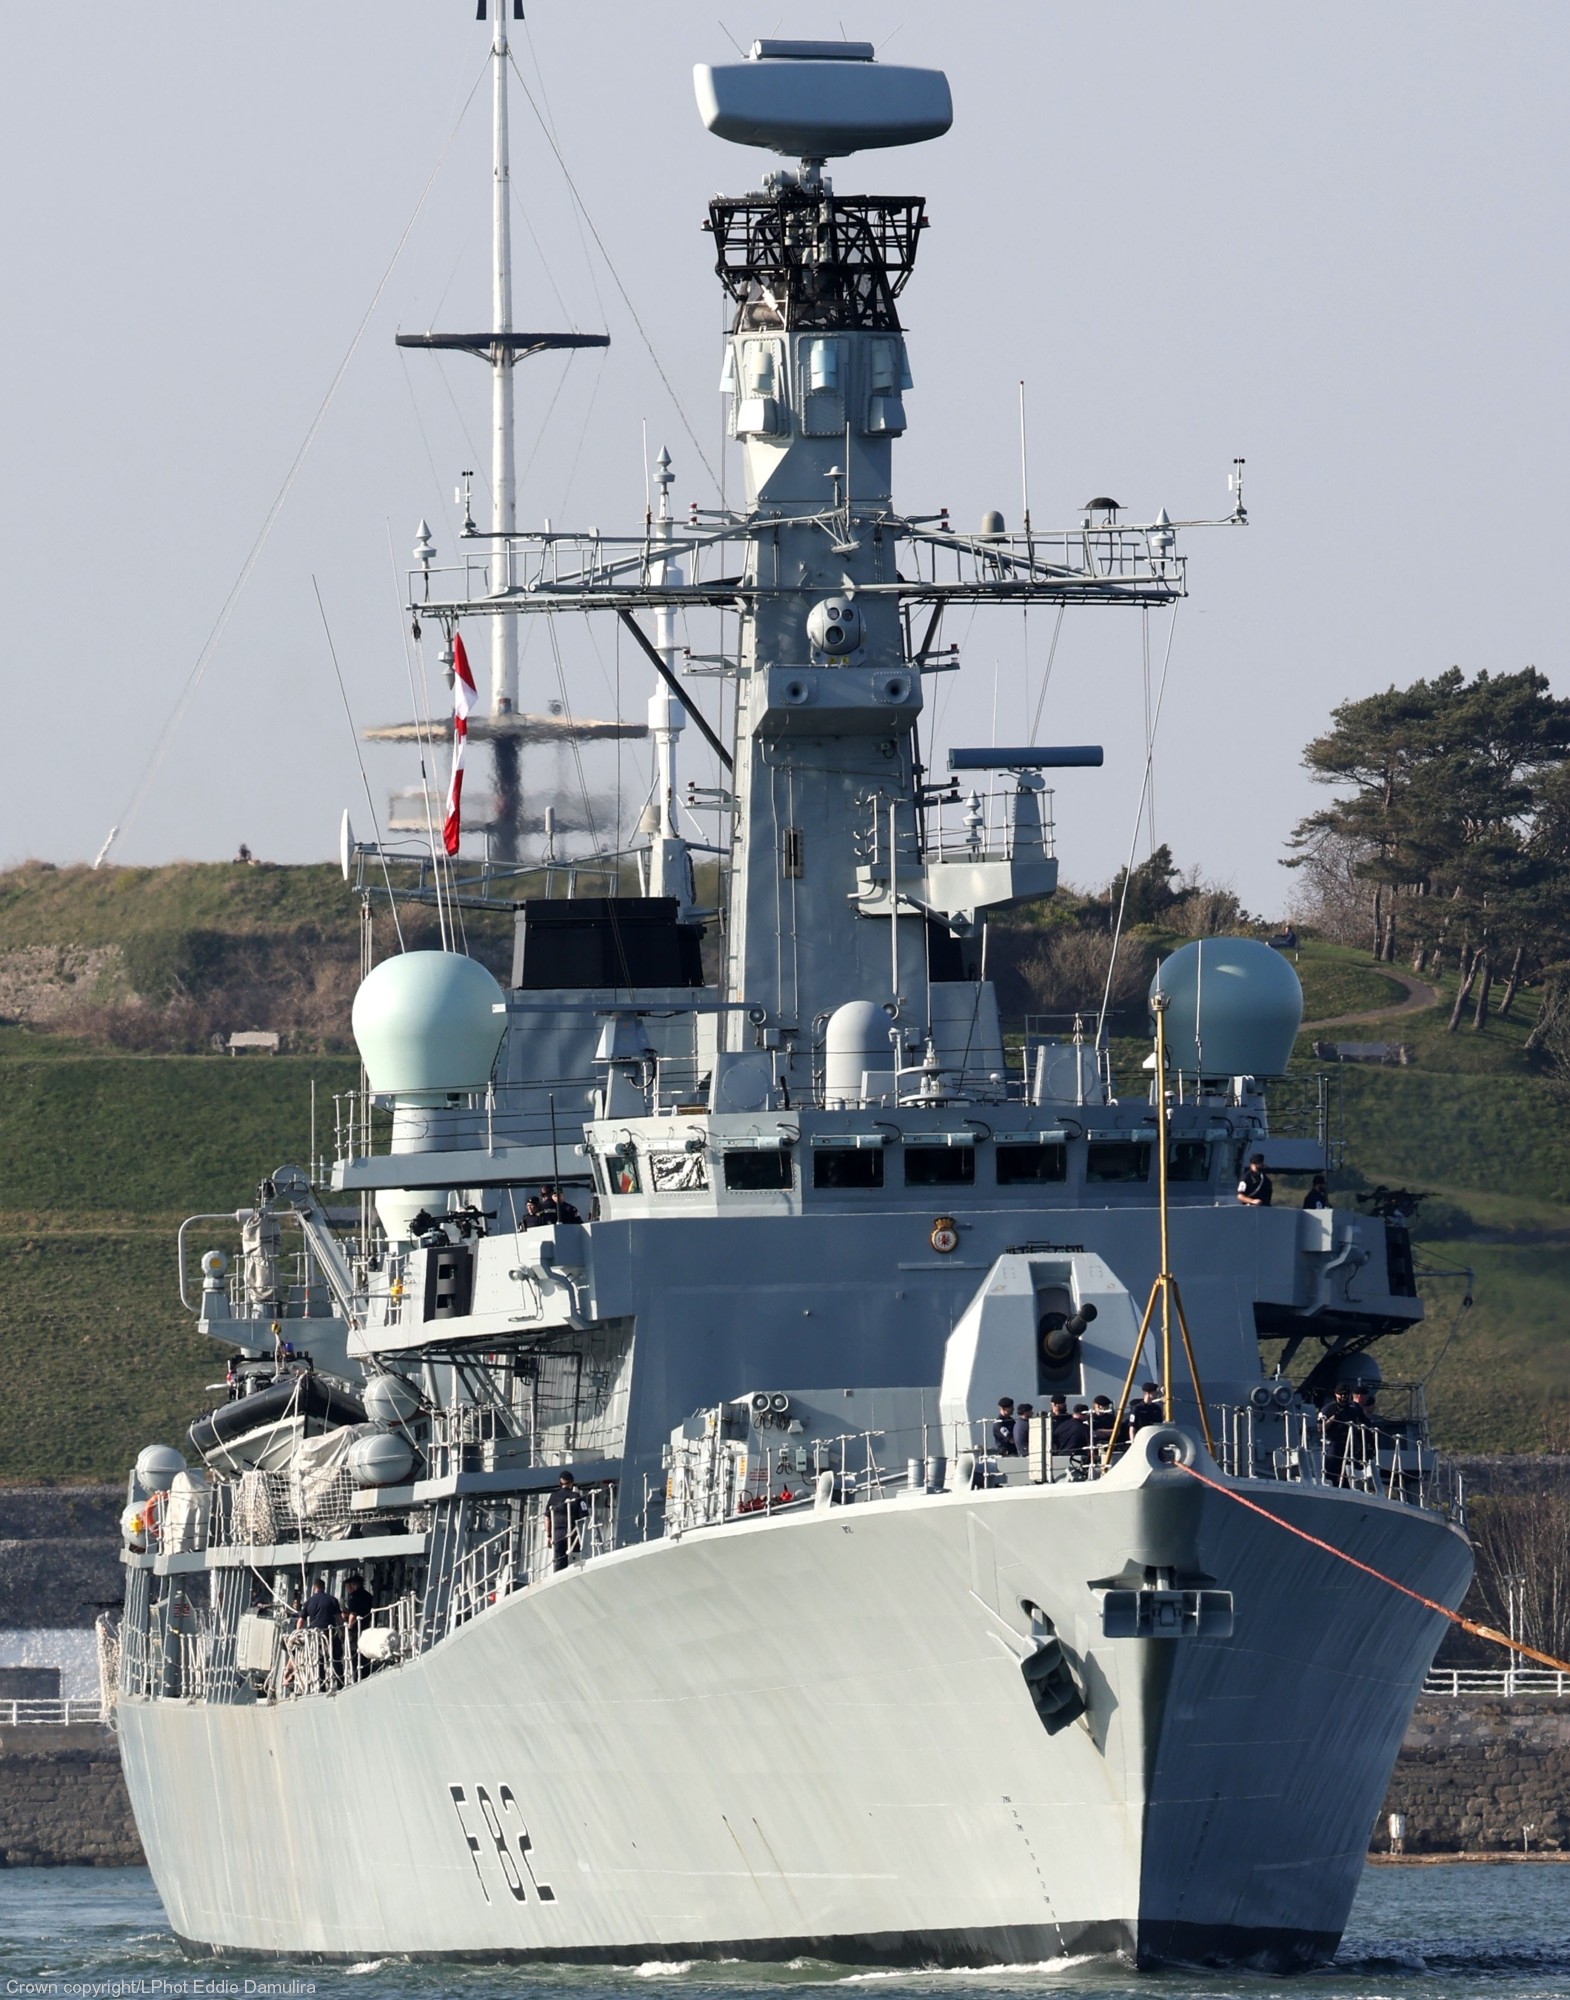 f-82 hms somerset type 23 duke class guided missile frigate ffg royal navy 36